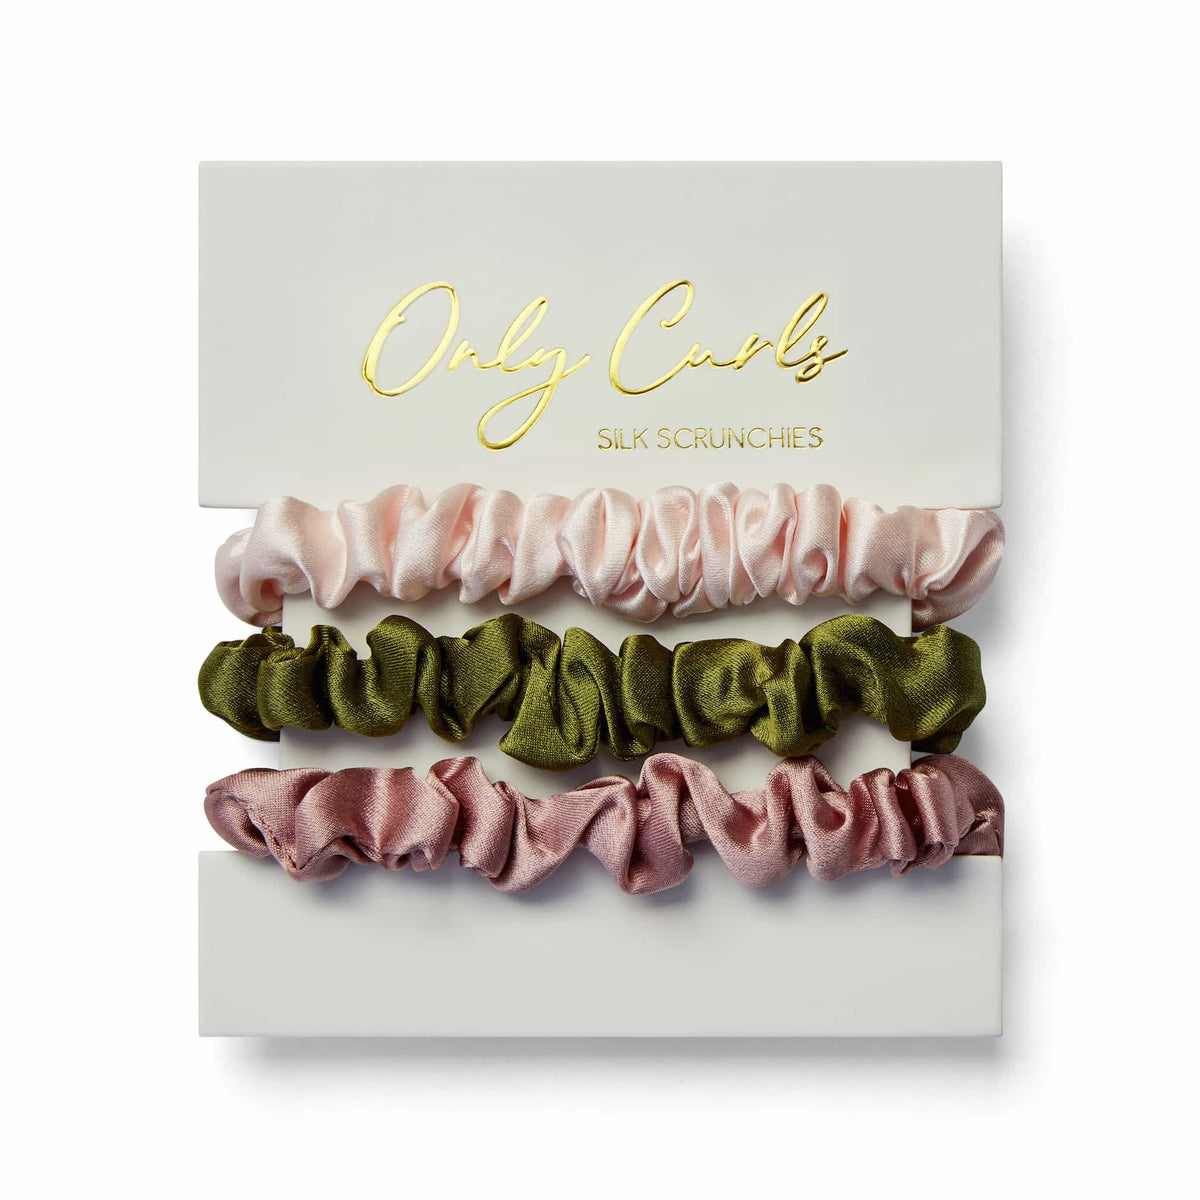 Only Curls Silk Scrunchies Multi Pack Mini - pinks and olive - Only Curls